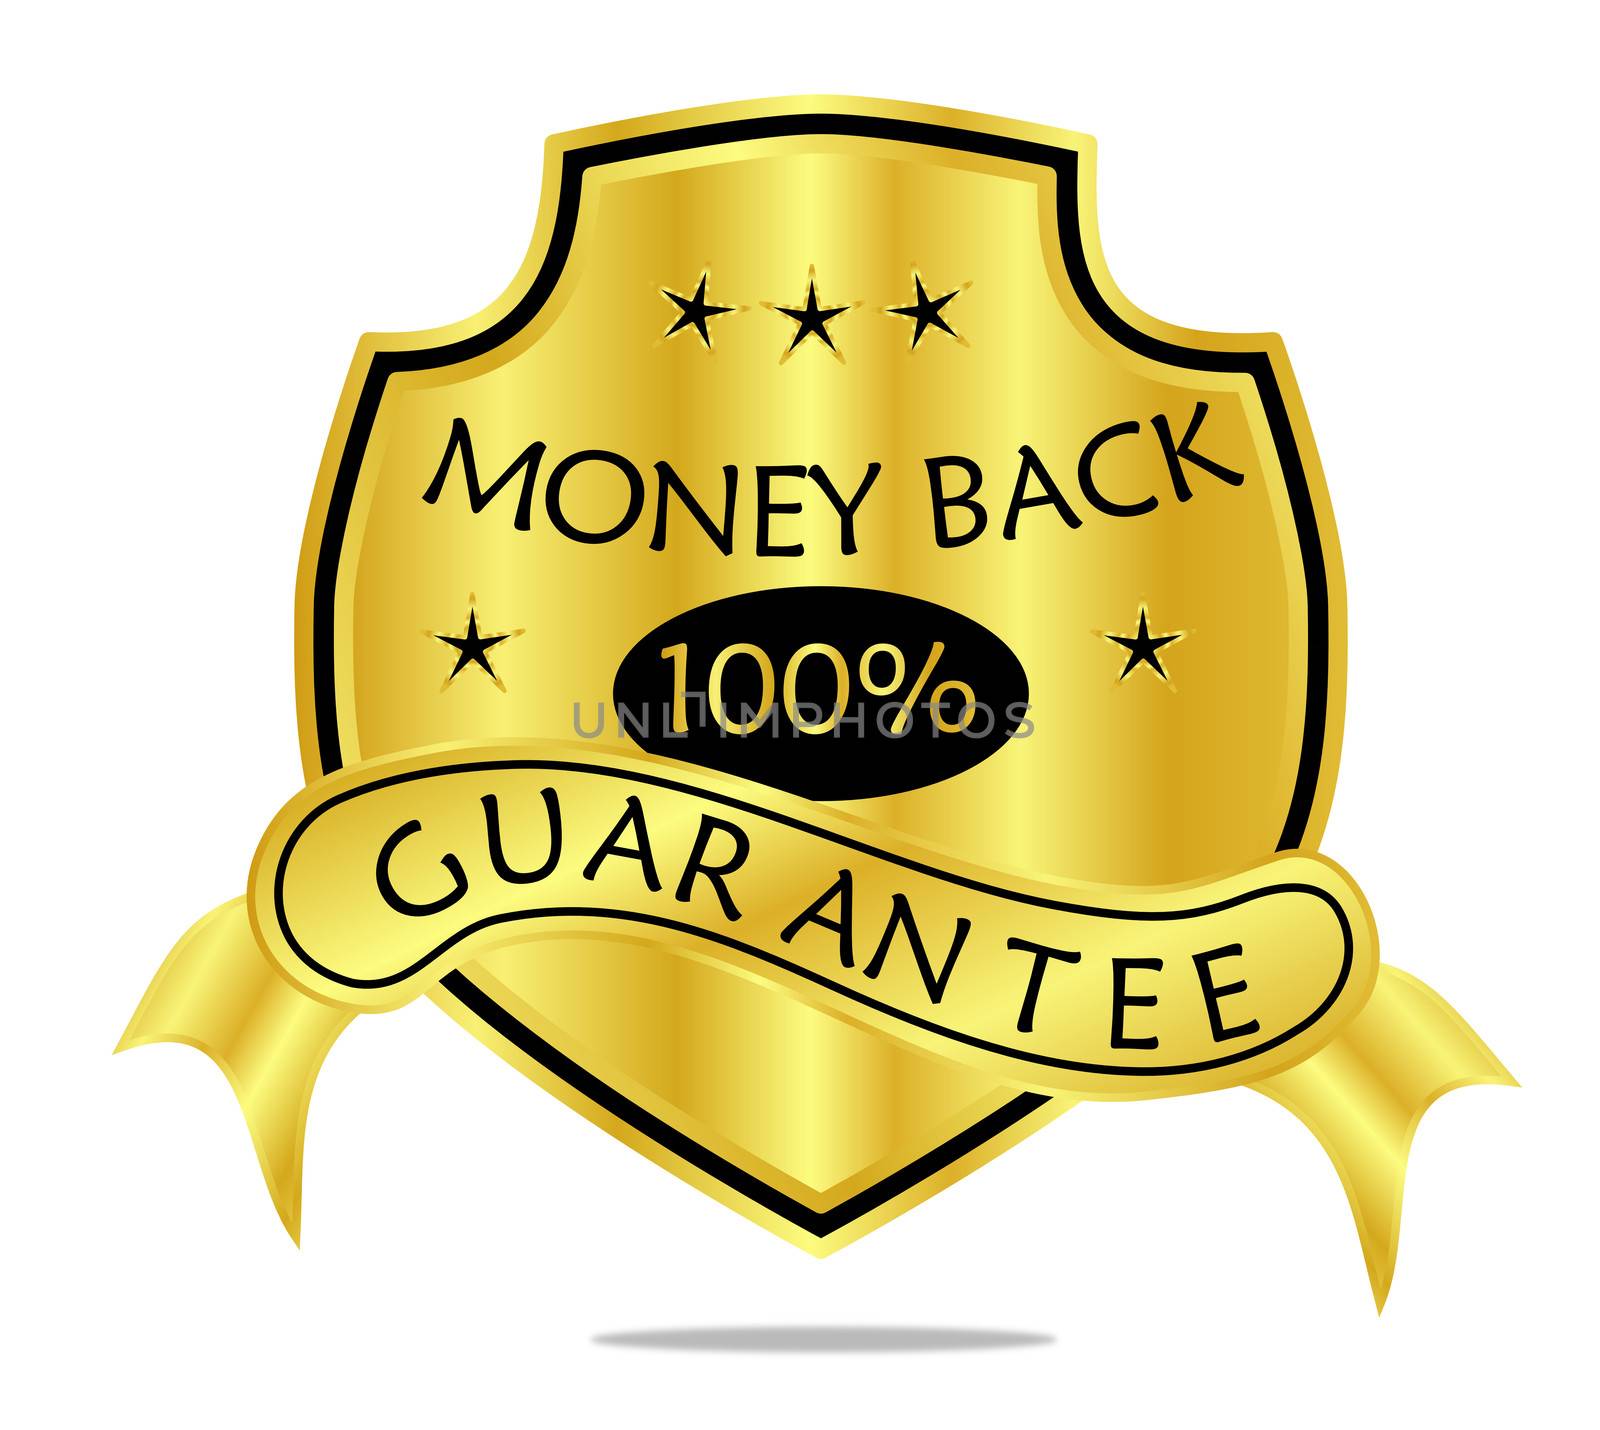 Money Back Guarantee Shield and Banner by RichieThakur